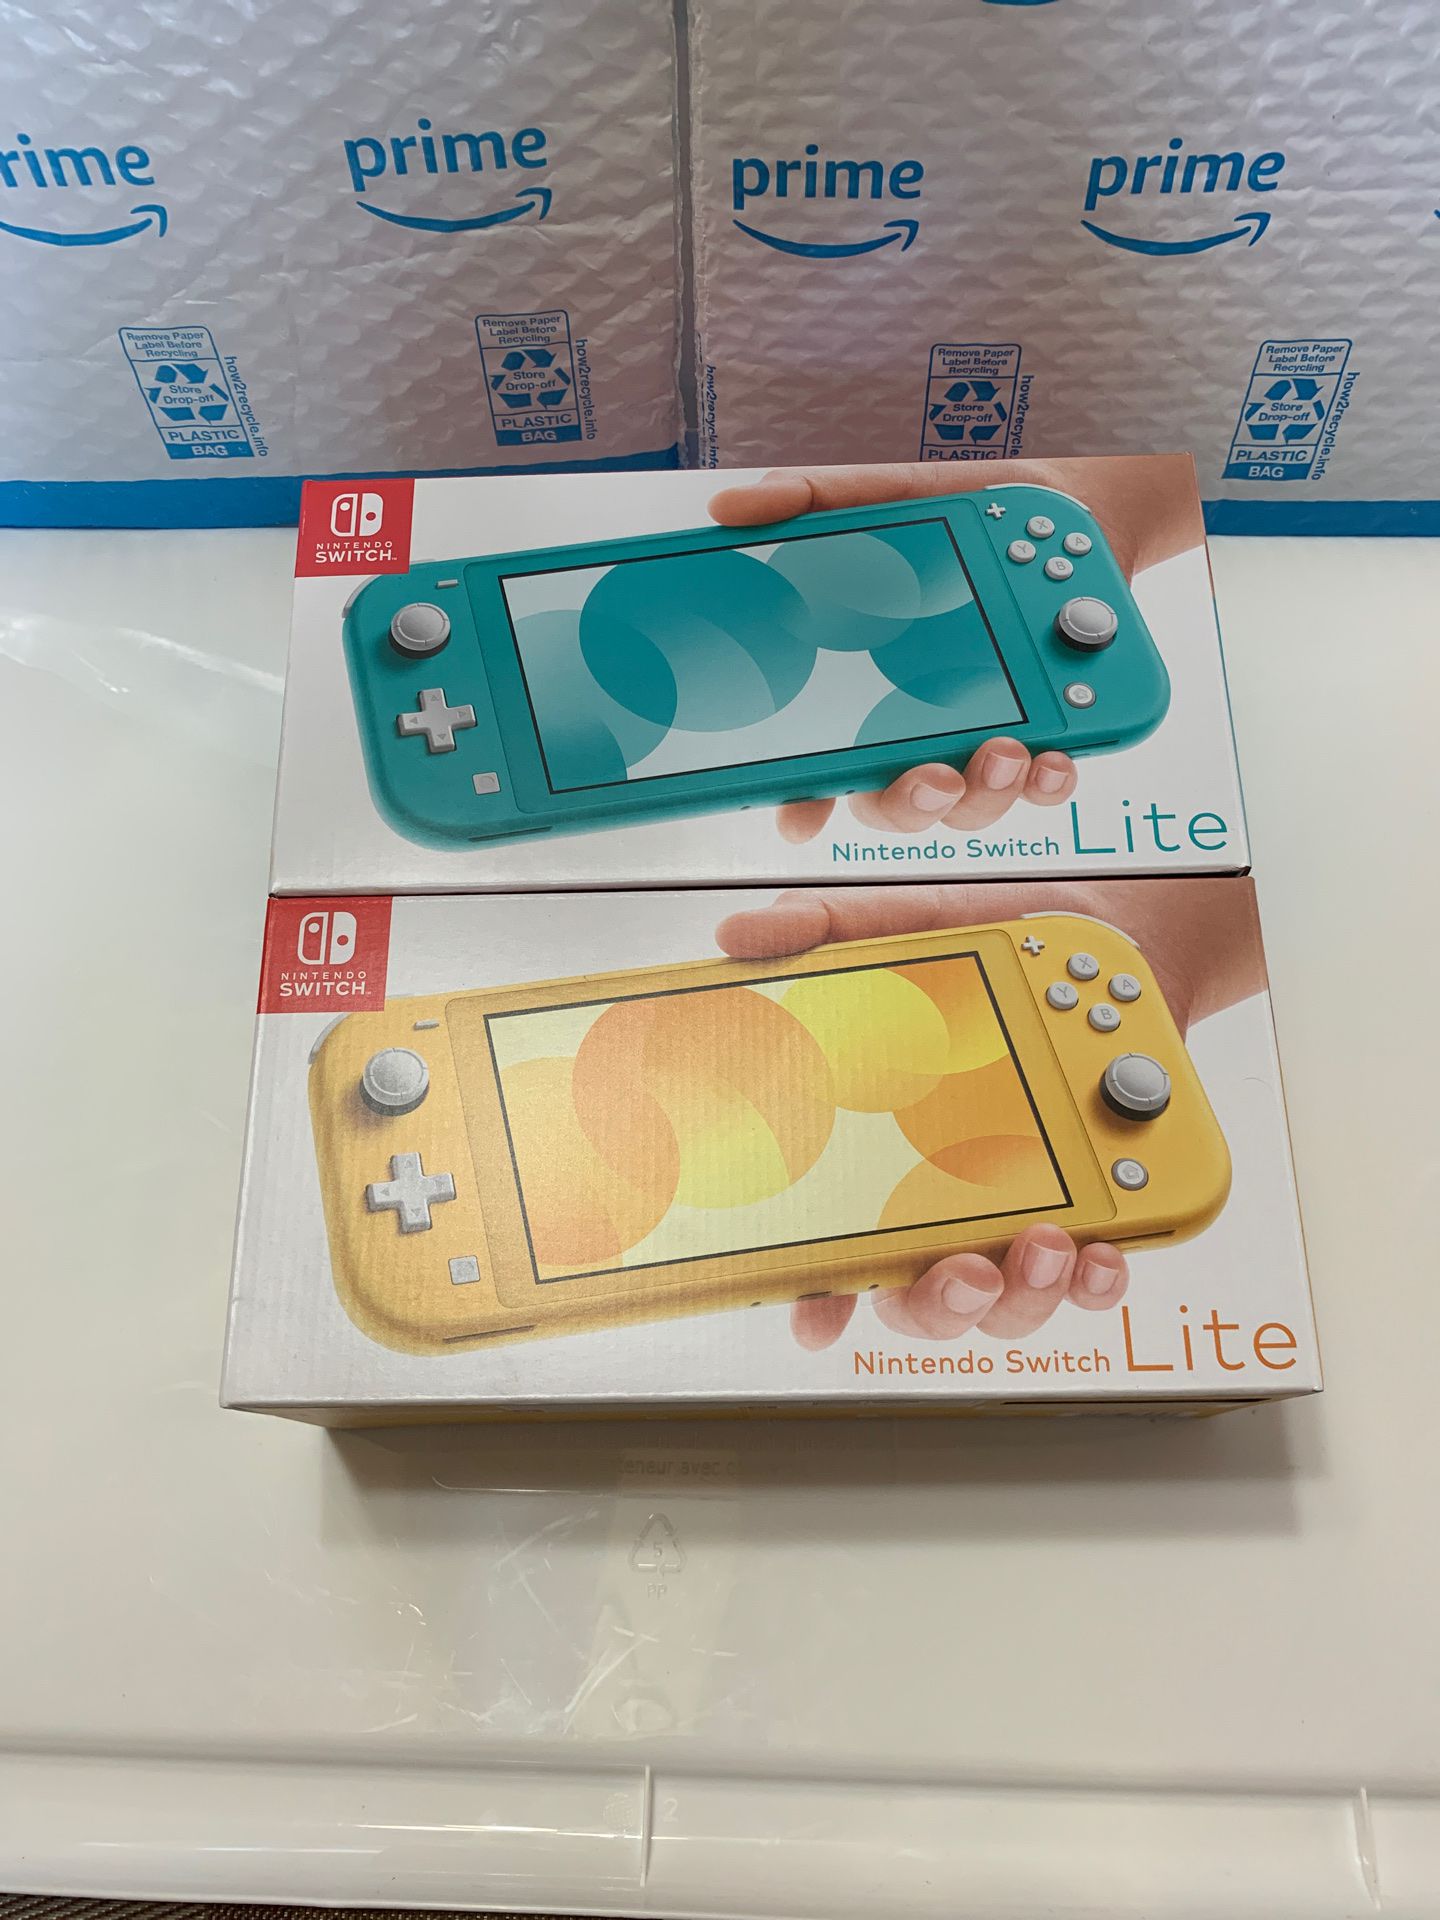 NEW Nintendo Switch Lite Handheld Console - Turquoise - Yellow PICK COlOR